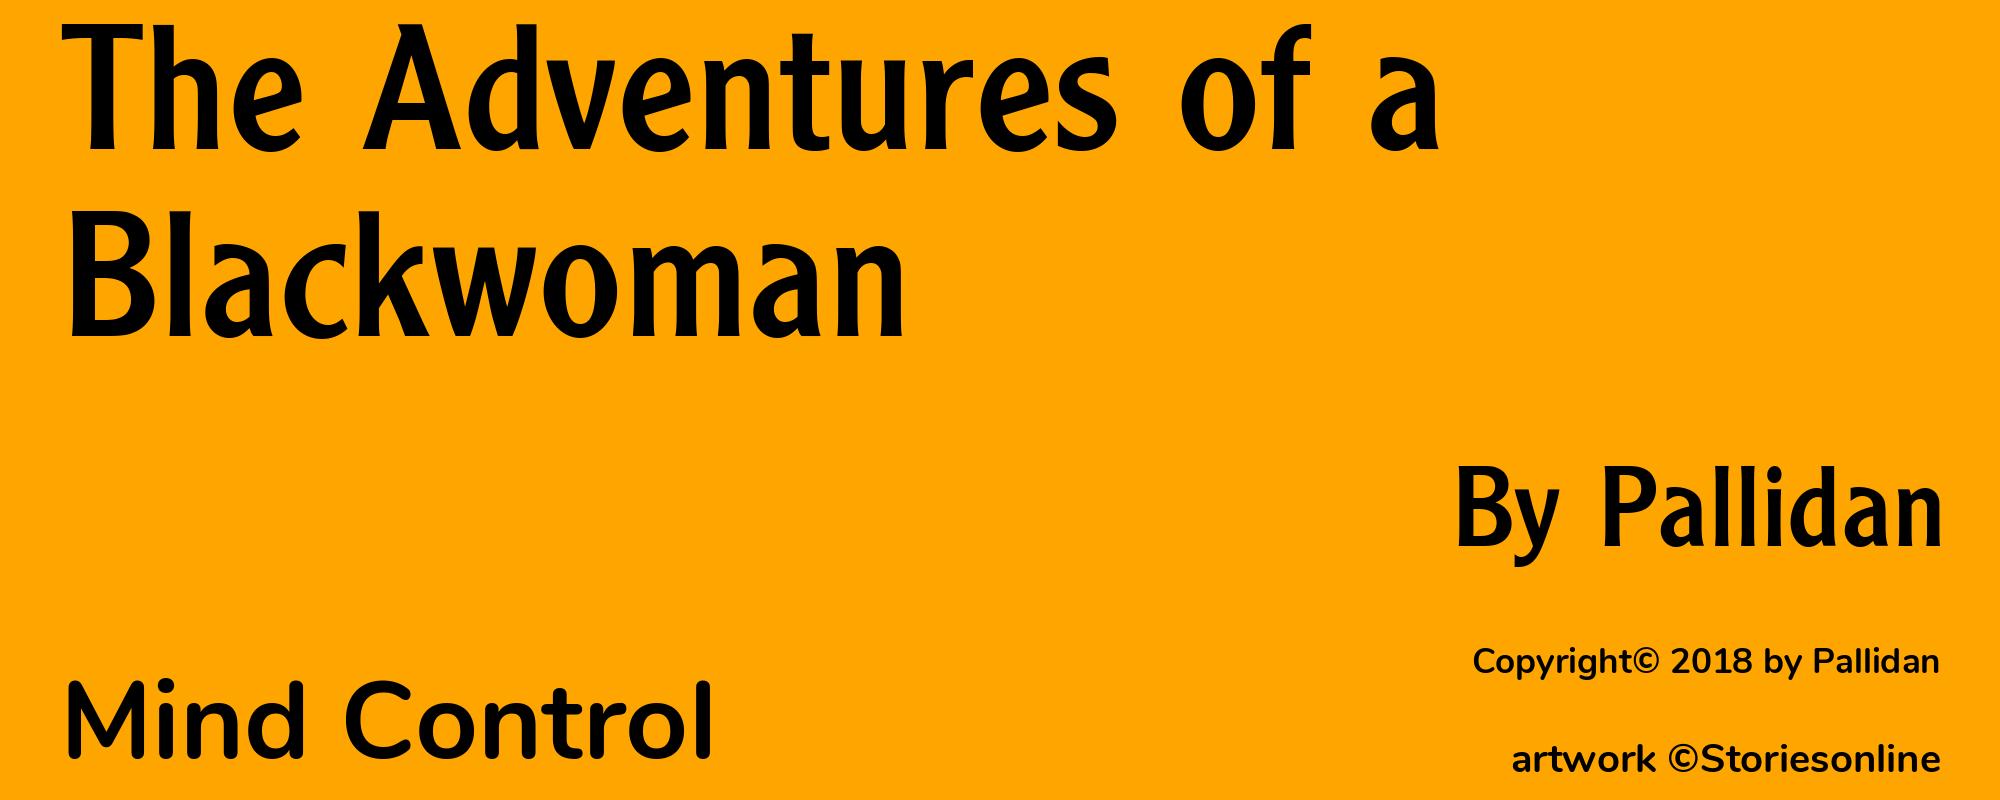 The Adventures of a Blackwoman - Cover